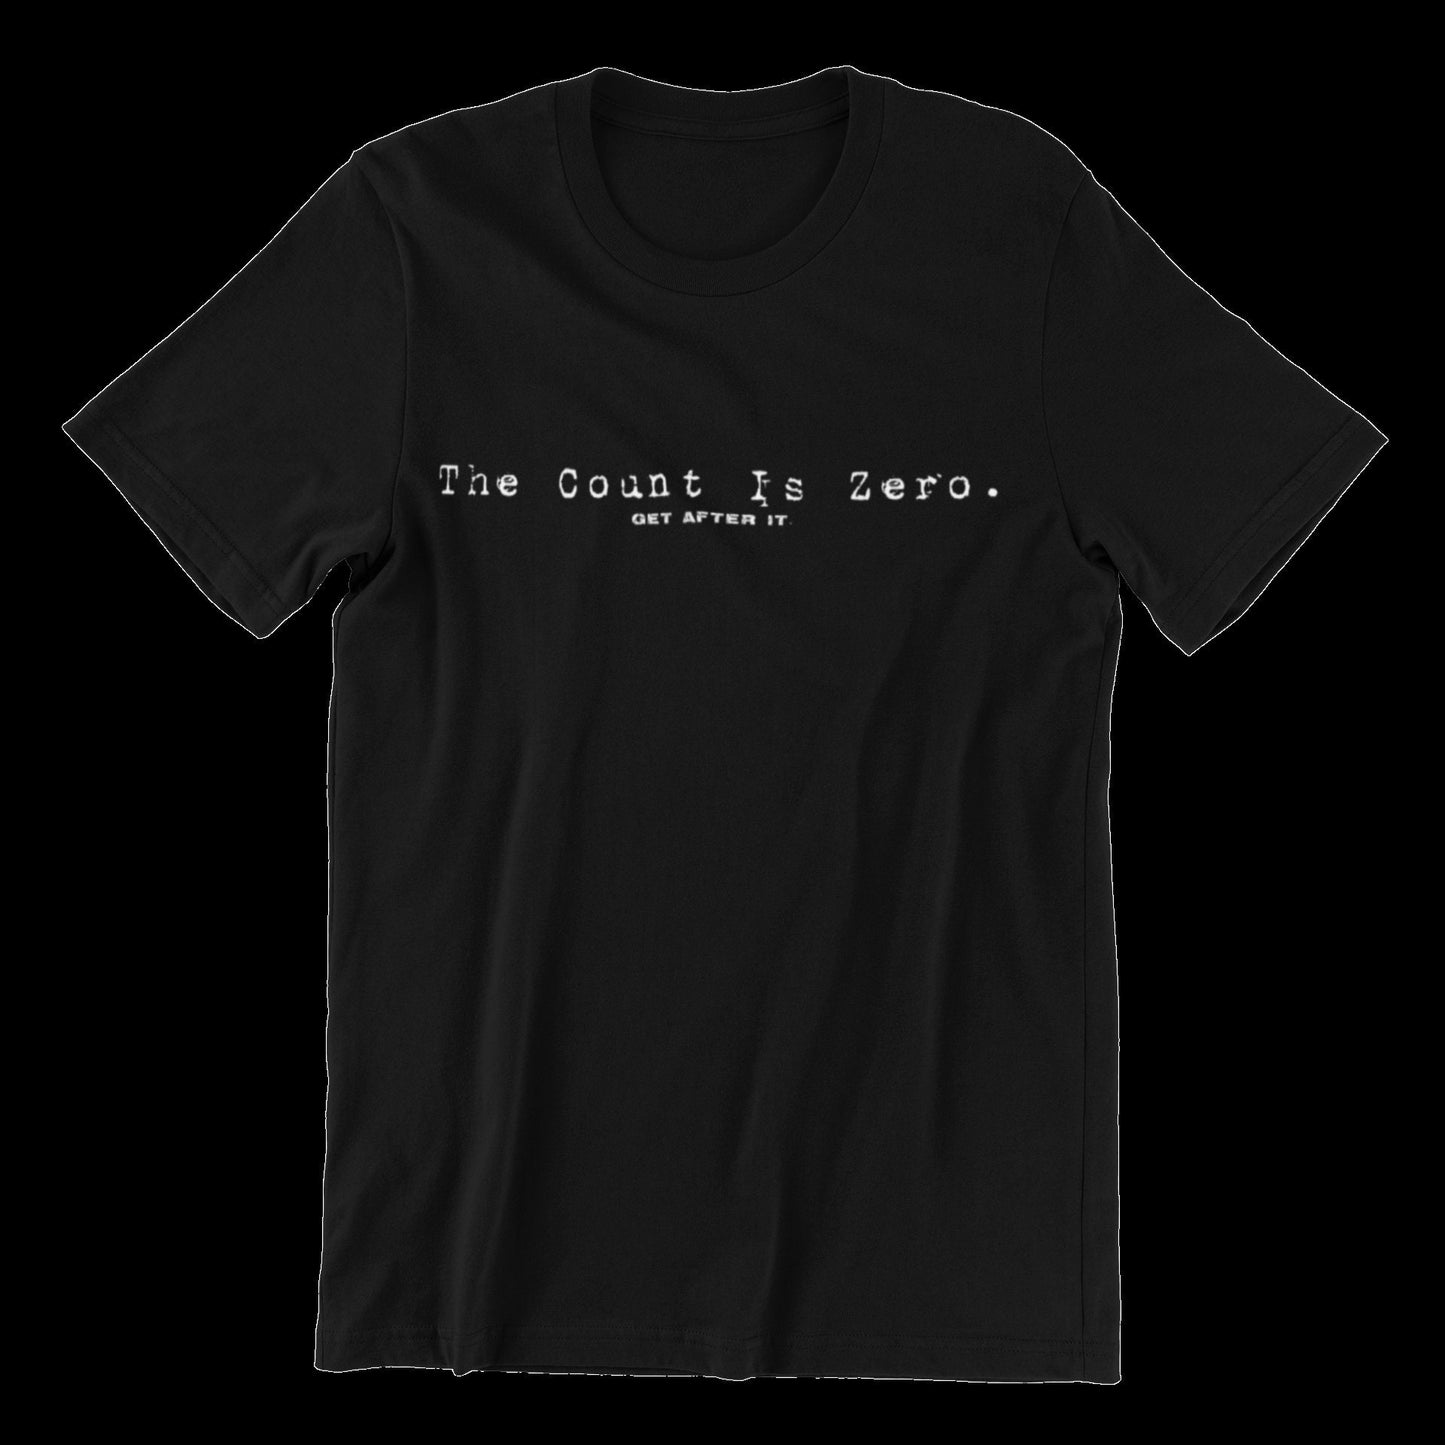 The count is Zero. Get After It - Jocko Willink inspired Navy Seal Army Custom T Shirt